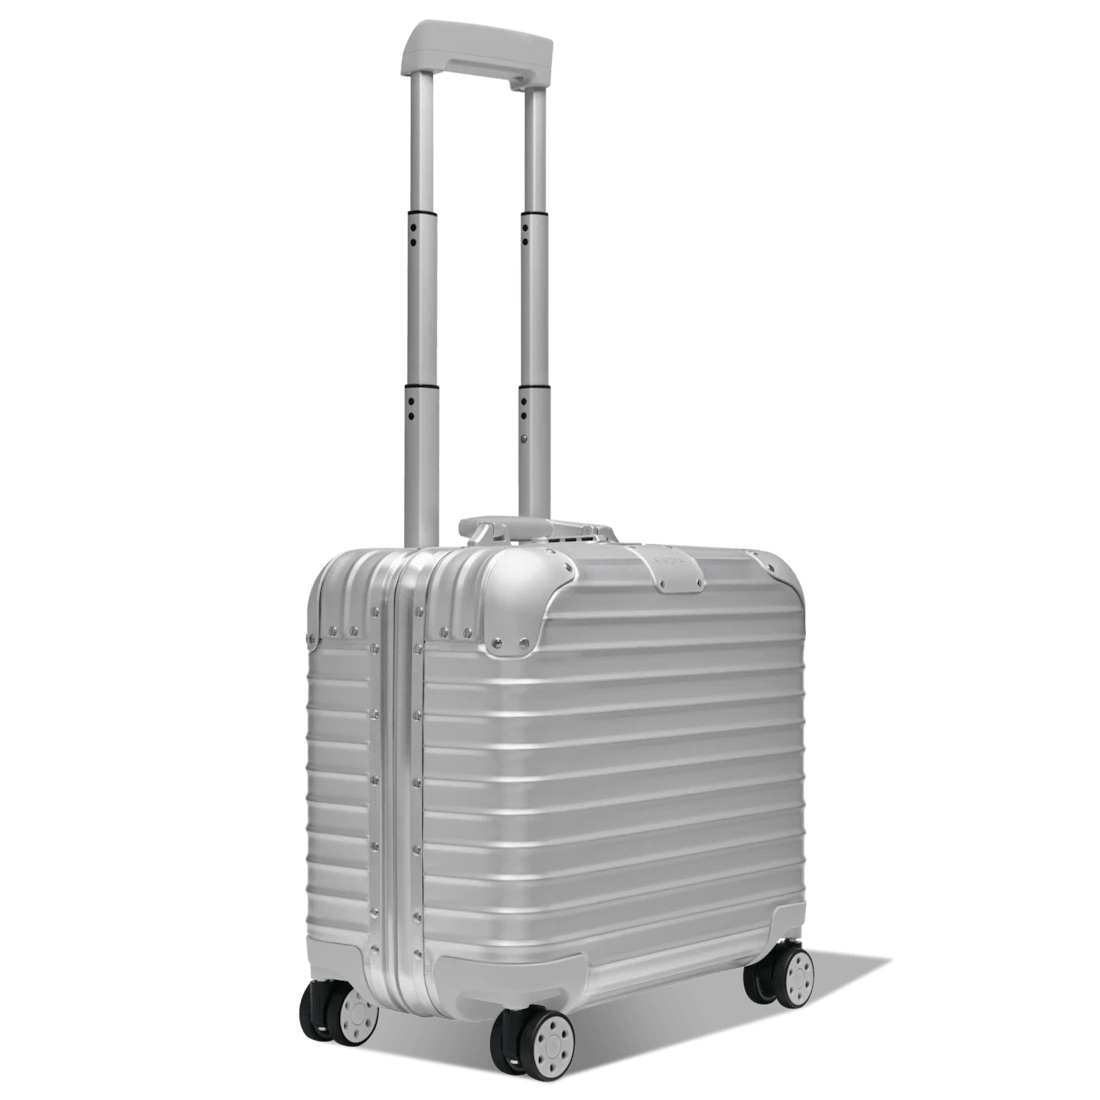 Best Small Carry-On: Rimowa Original Compact